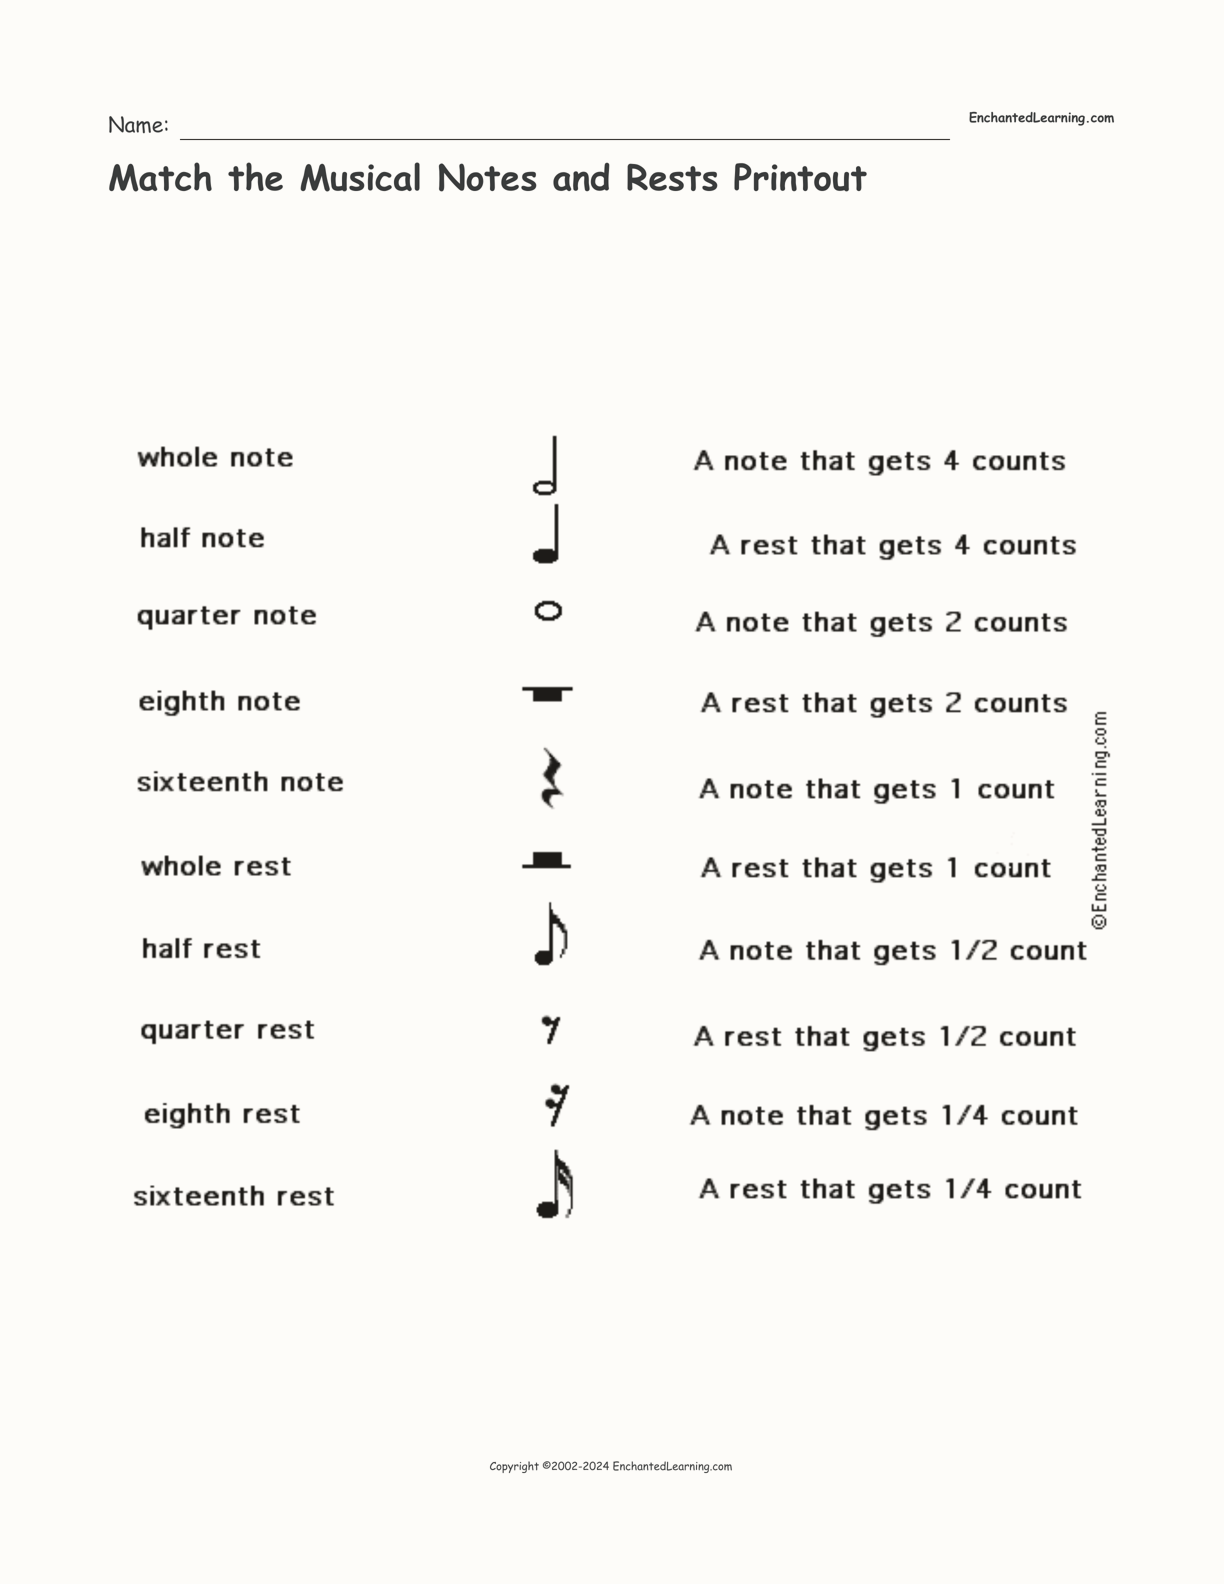 Match the Musical Notes and Rests Printout interactive worksheet page 1